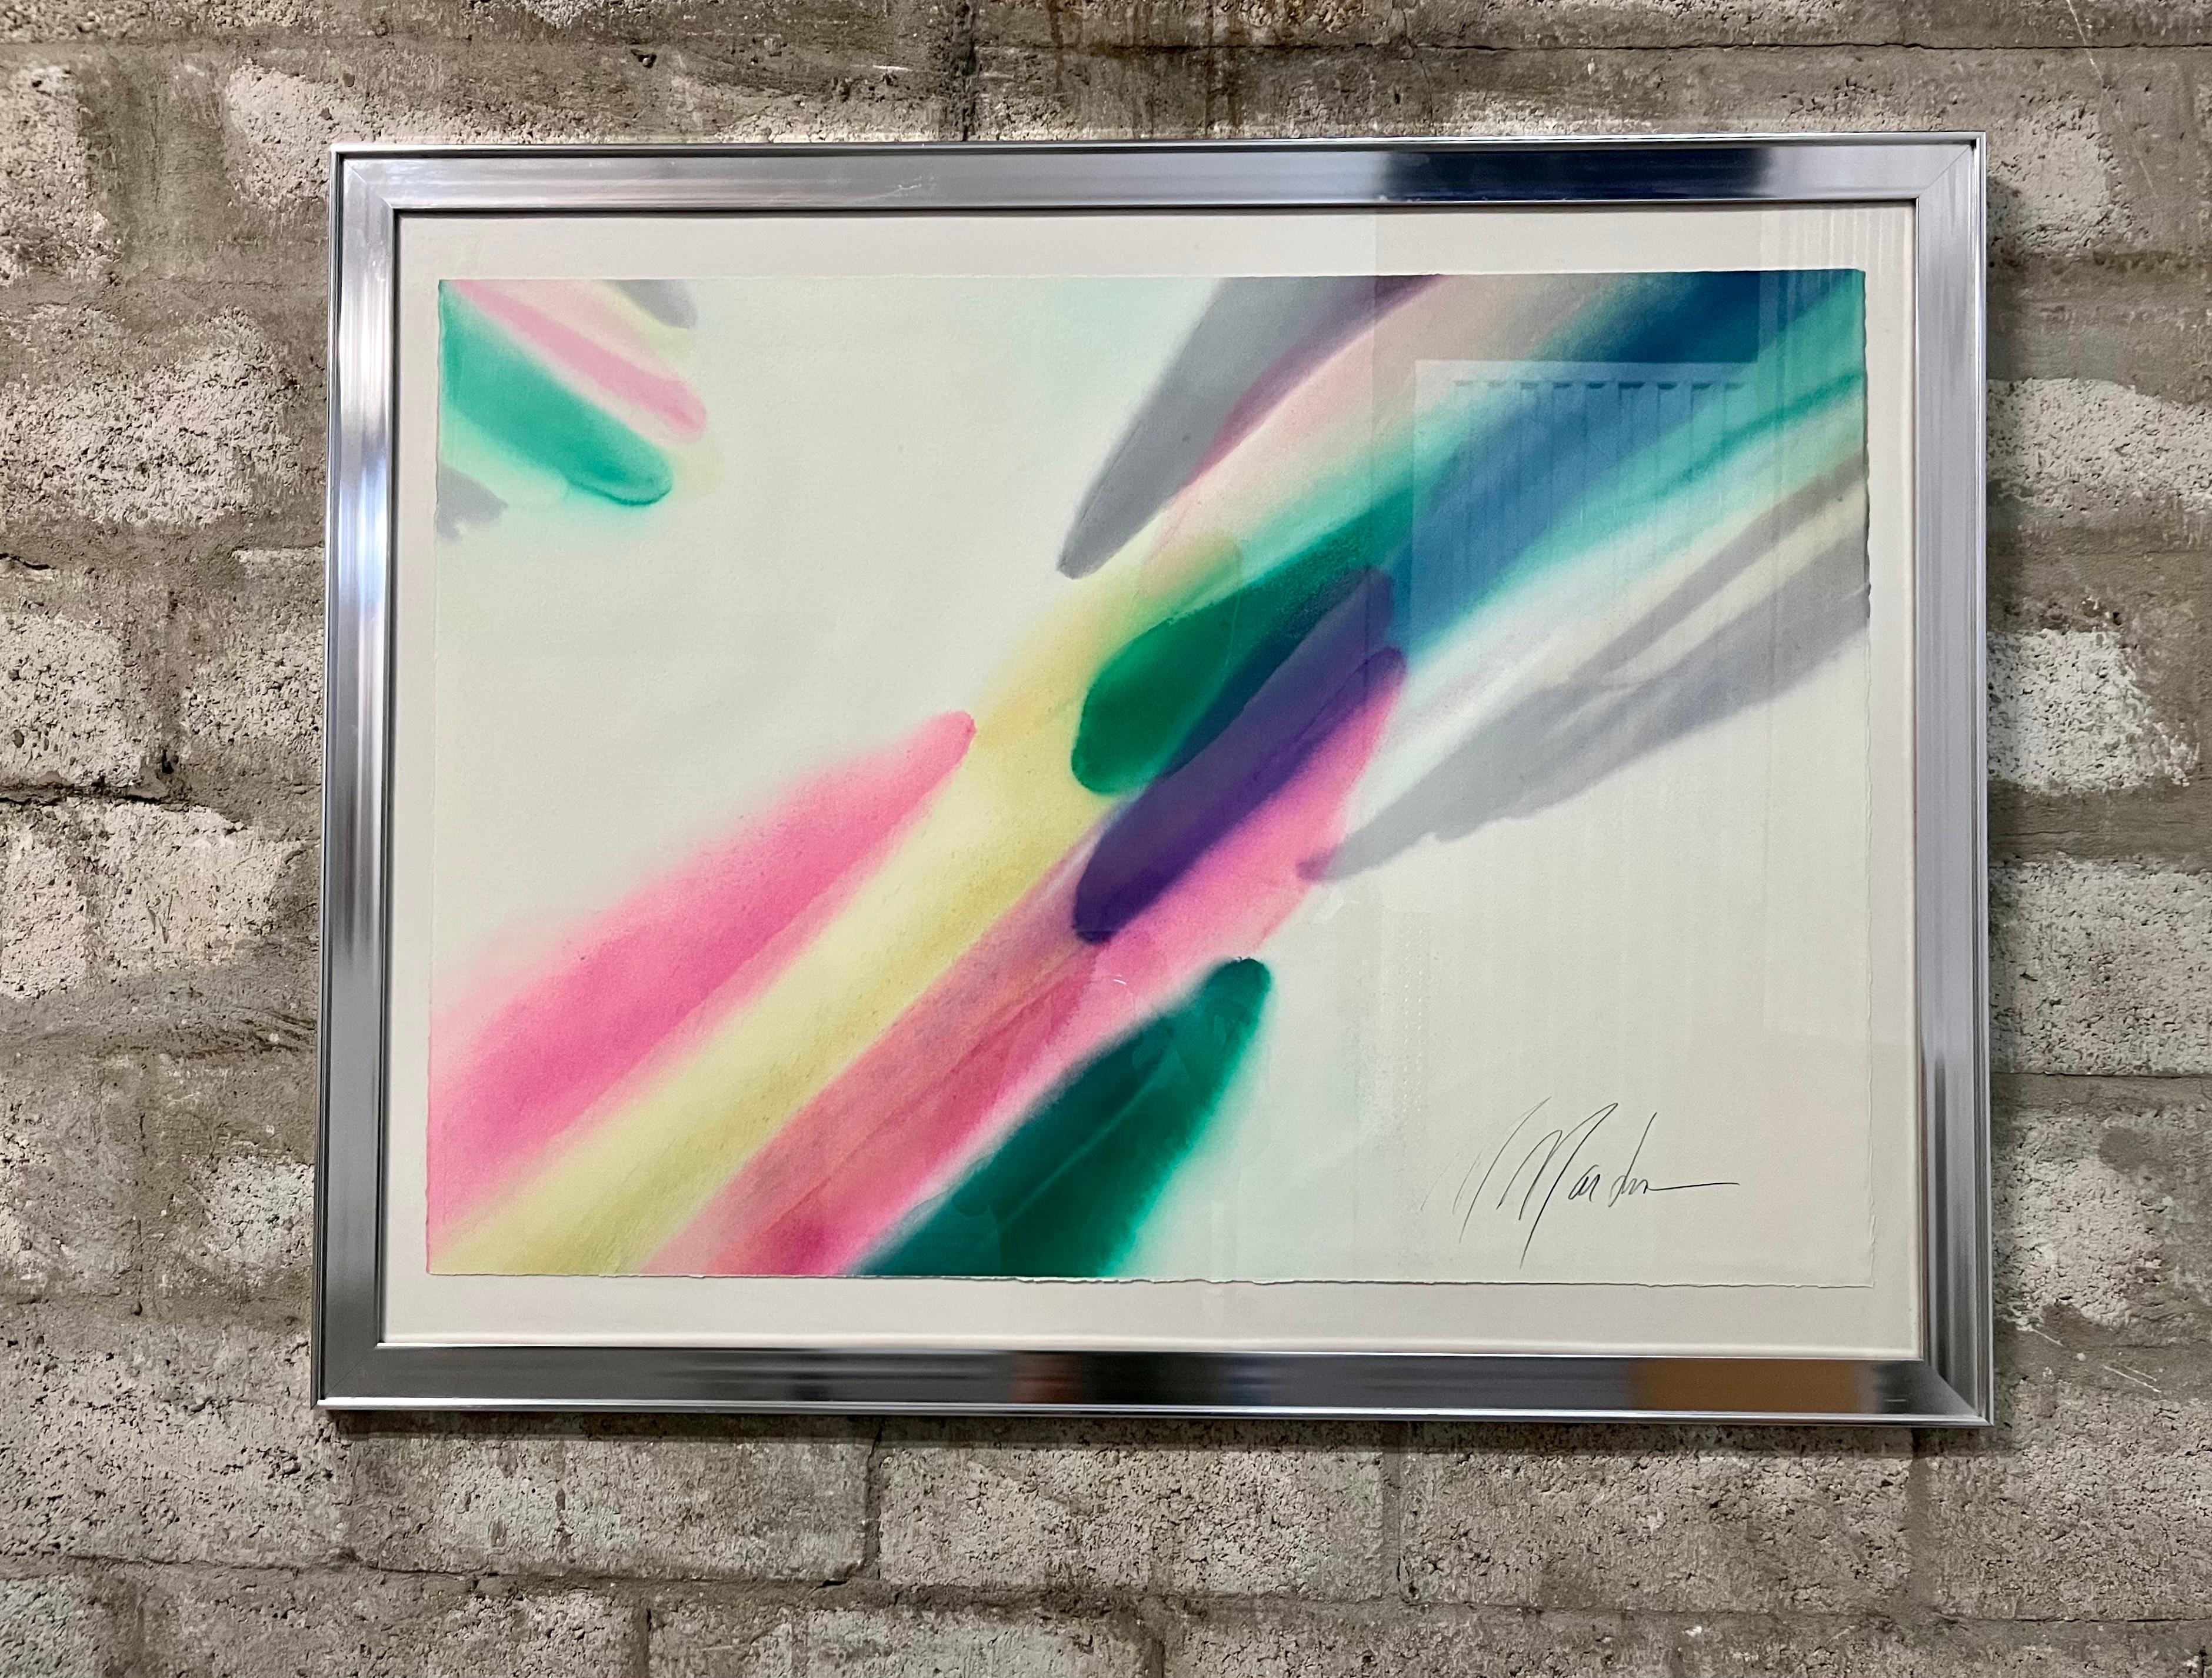 Large Scale Postmodern Abstract Washed Colors Framed Painting in the style of Helen Frankenthaler. Circa 1970's. 
Signed lower right in pencil by the artist (Probably M. Martin)
Framed under glass in a chromed frame and ready for hanging. 
The